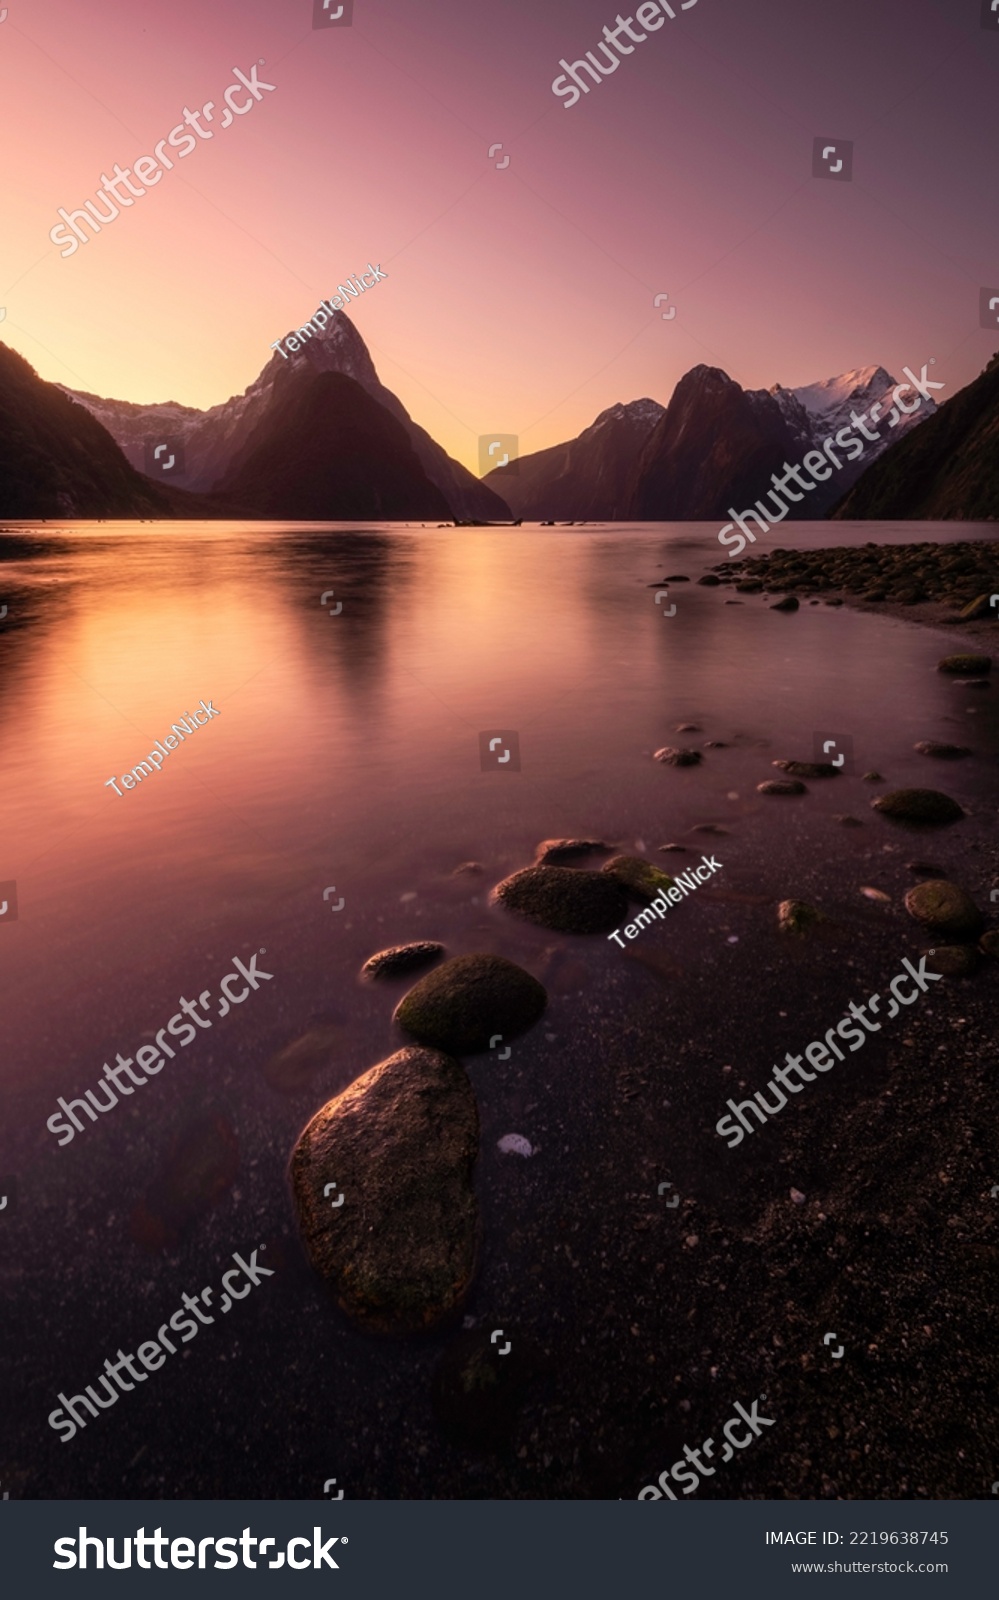 Intense twilight colors glow in the clear morning sky over the Milford Sound of New Zealand in the Fiordland National Park. #2219638745